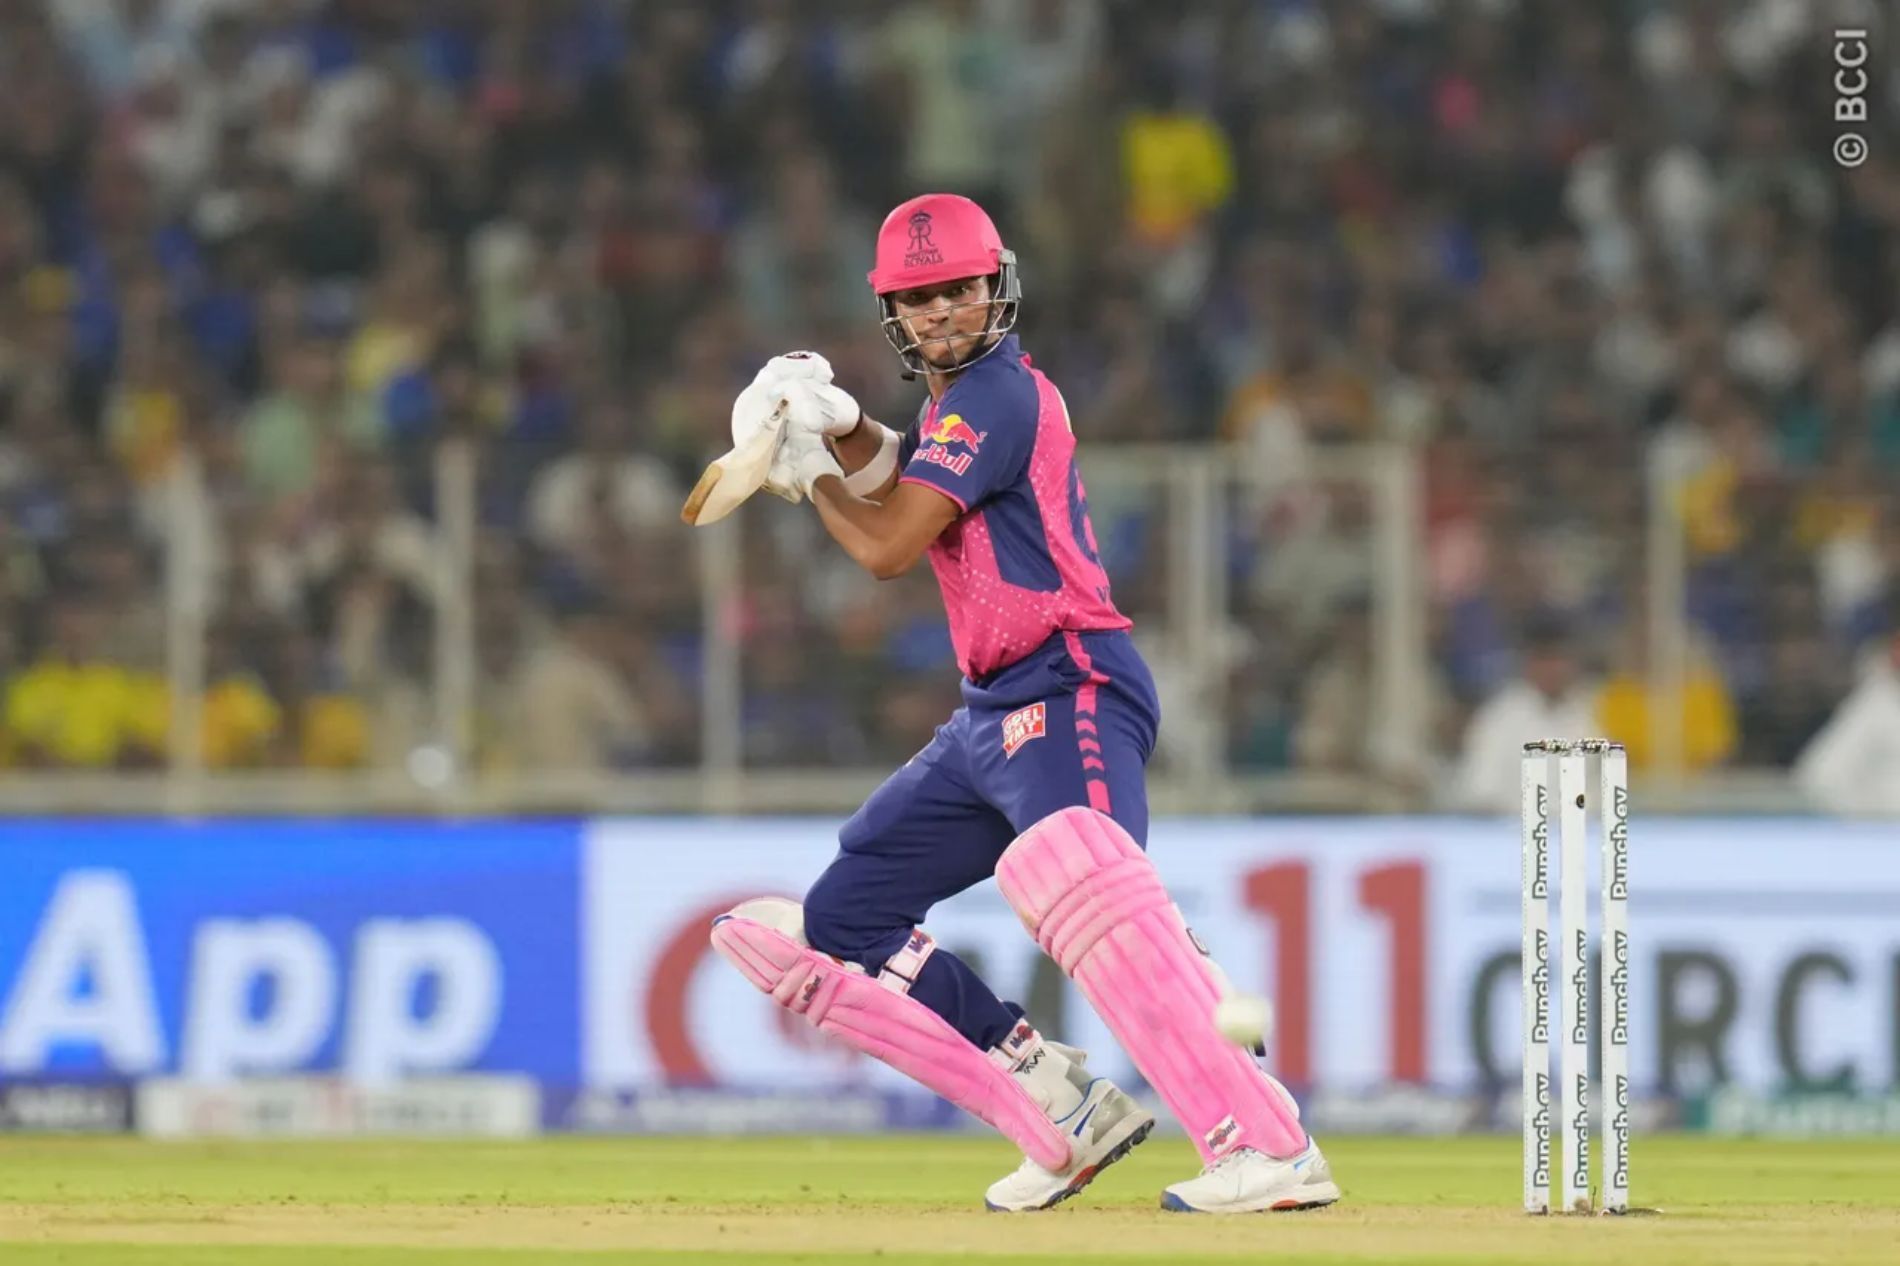 Yashasvi Jaiswal top-scored for RR in the chase with 45 off 30. (Image Credit: BCCI/ iplt20.com)